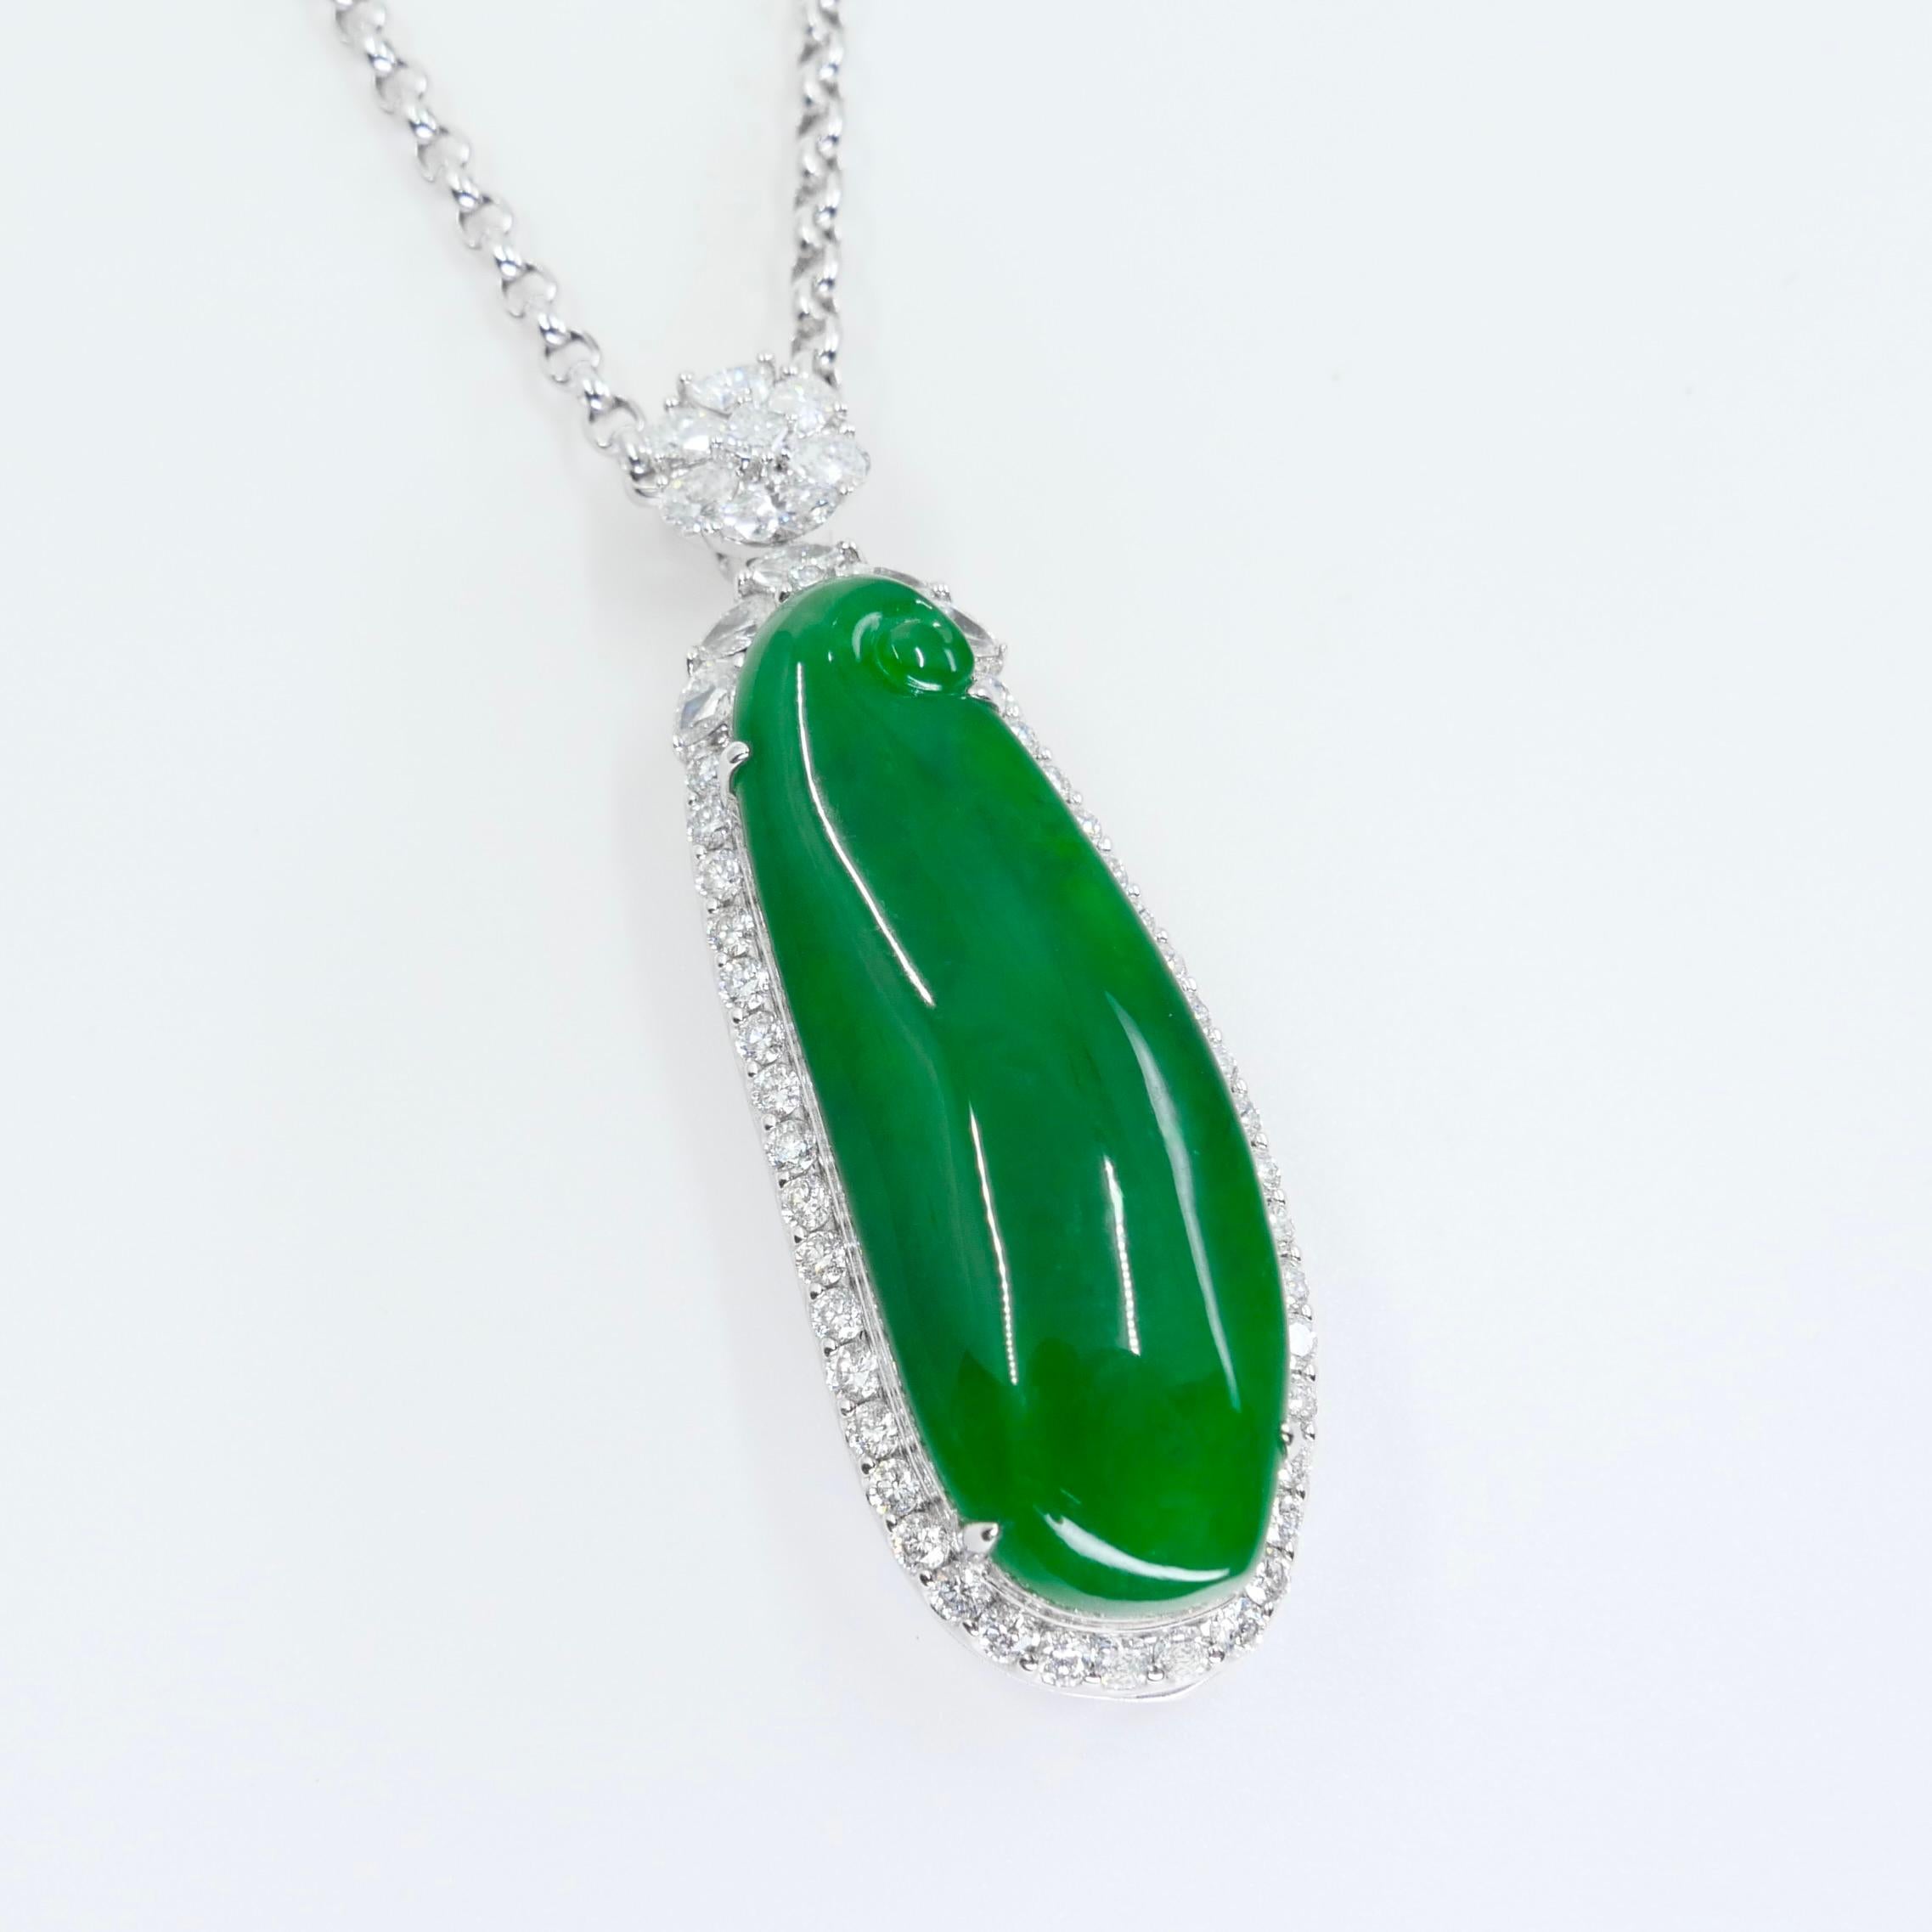 Rough Cut Certified Jade & Diamond Statement Pendant. Imperial Green Color & Substantial.  For Sale